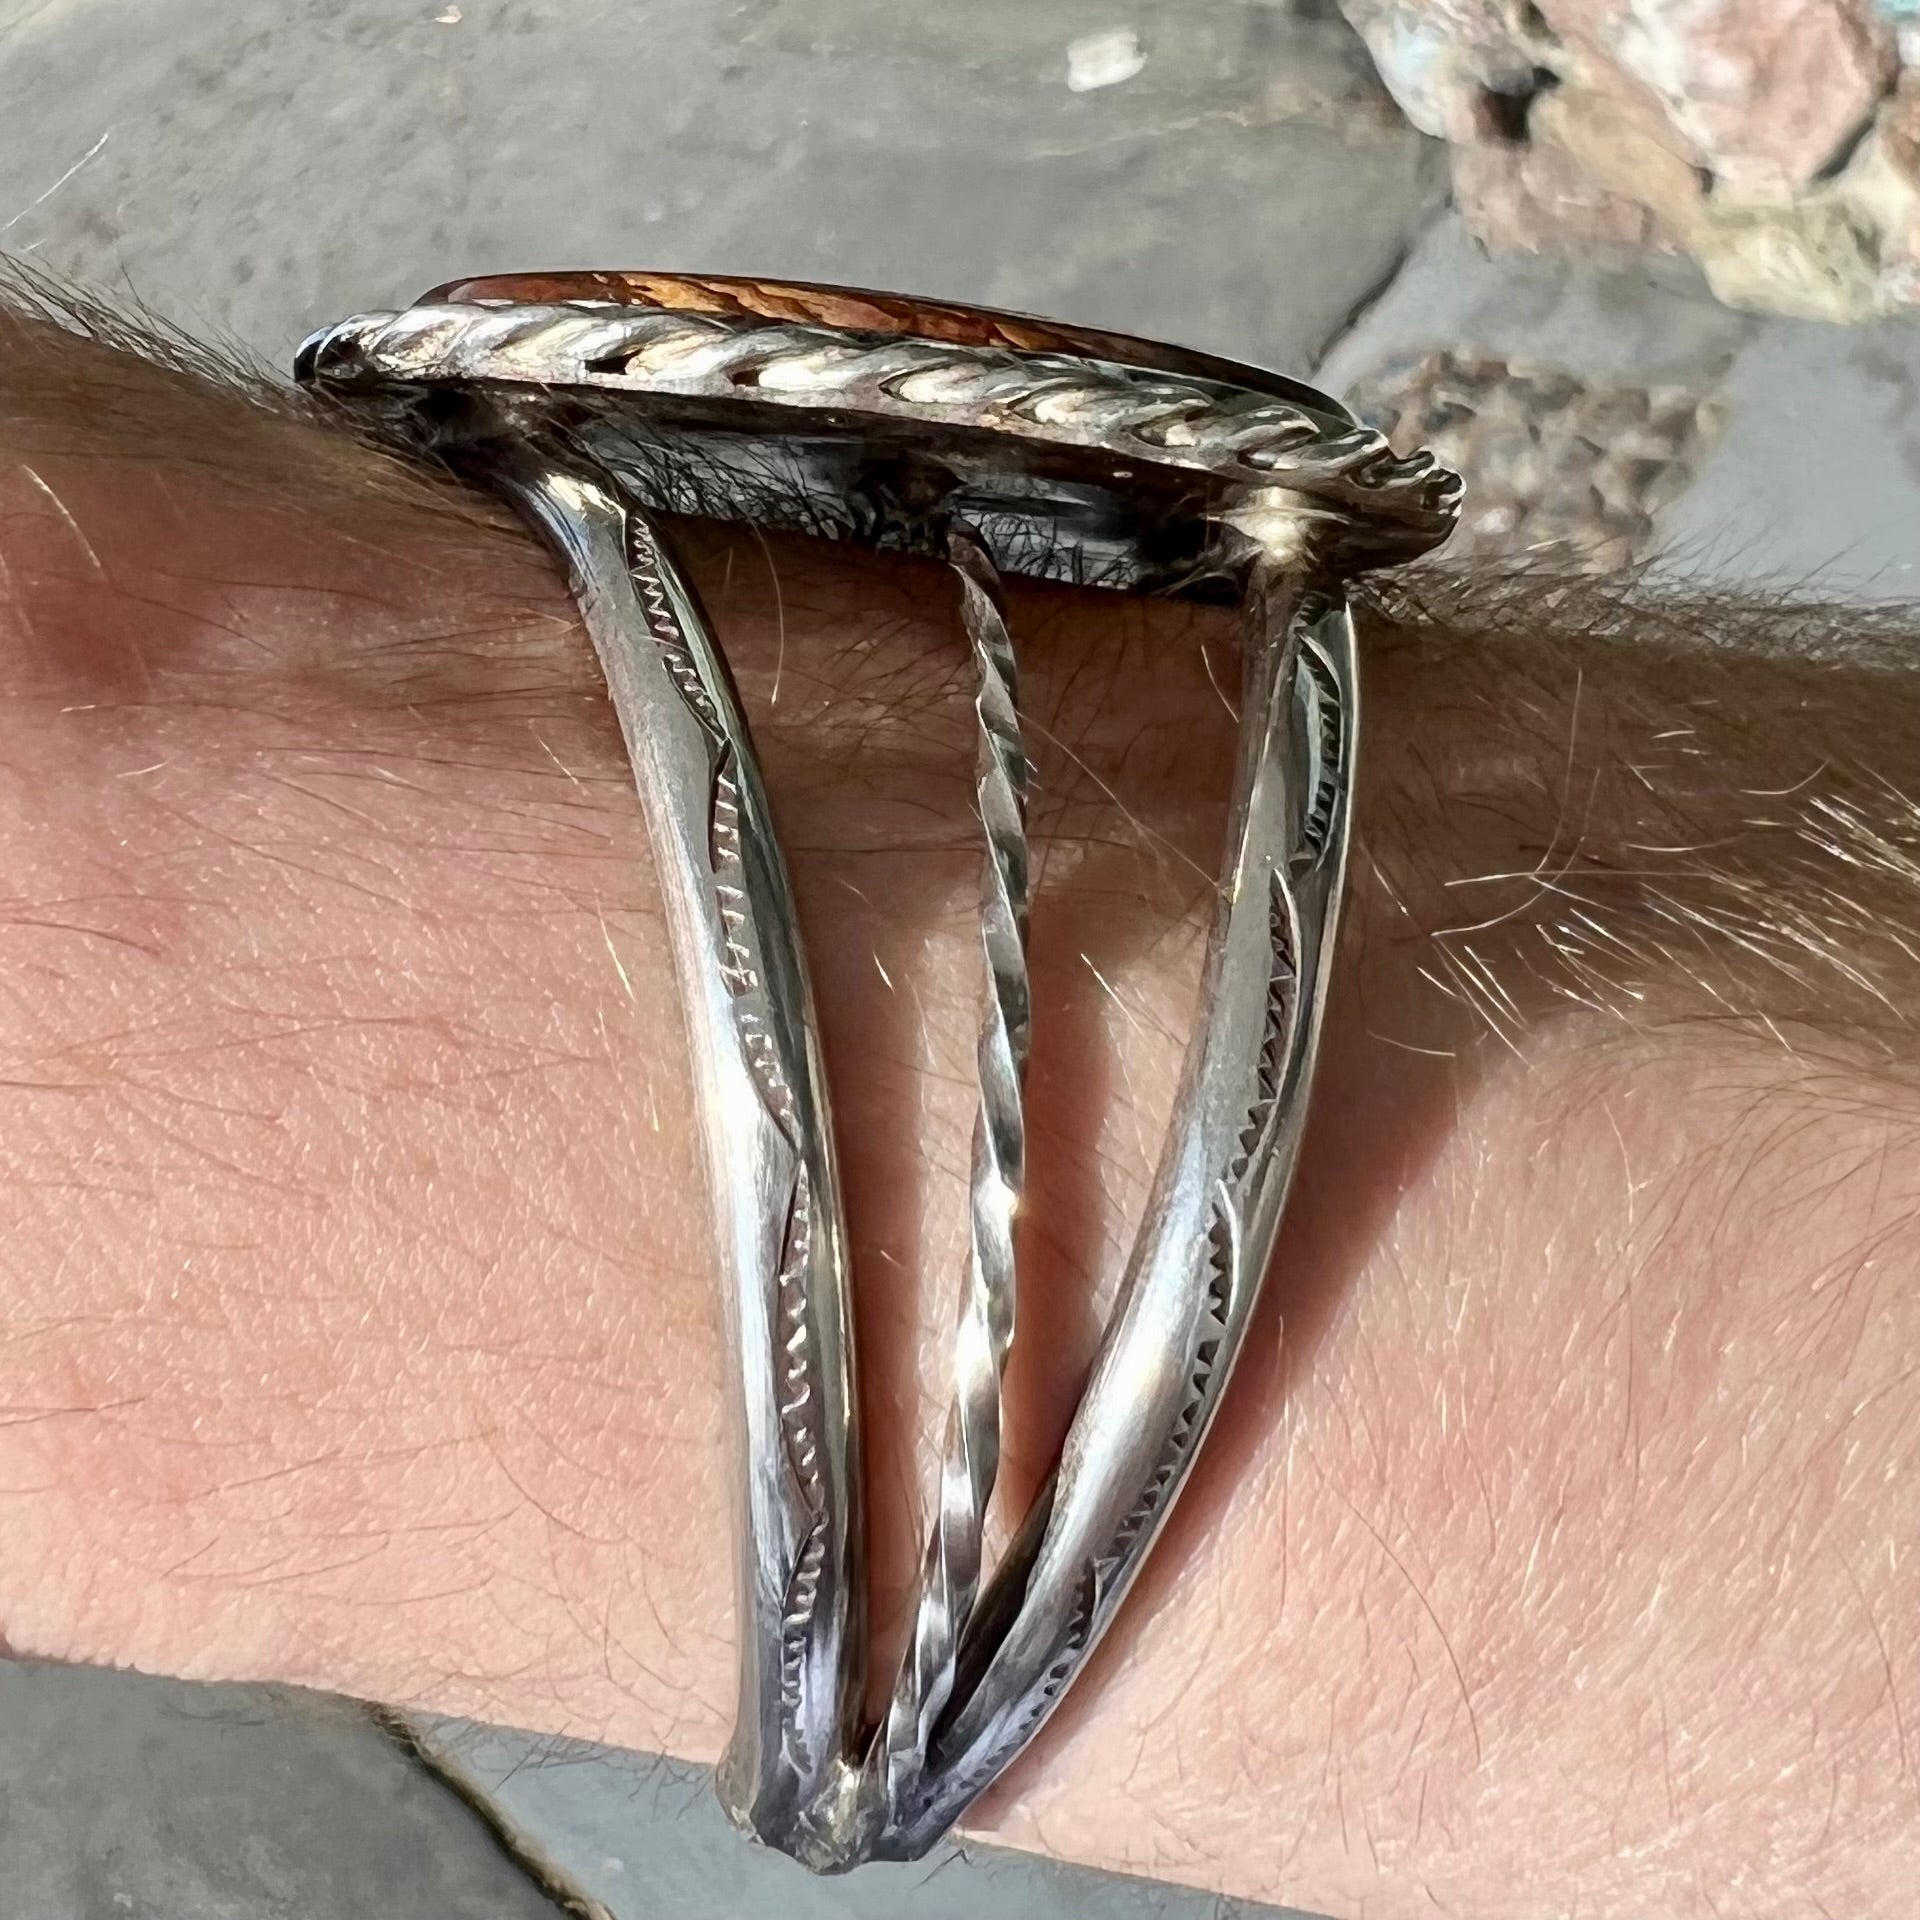 Gothic Vintage Men's Stainless Steel Cuff Bracelet Bangles Fashion Punk  Eagle Animal Feather Bracelets Jewelry Gifts Adjustable